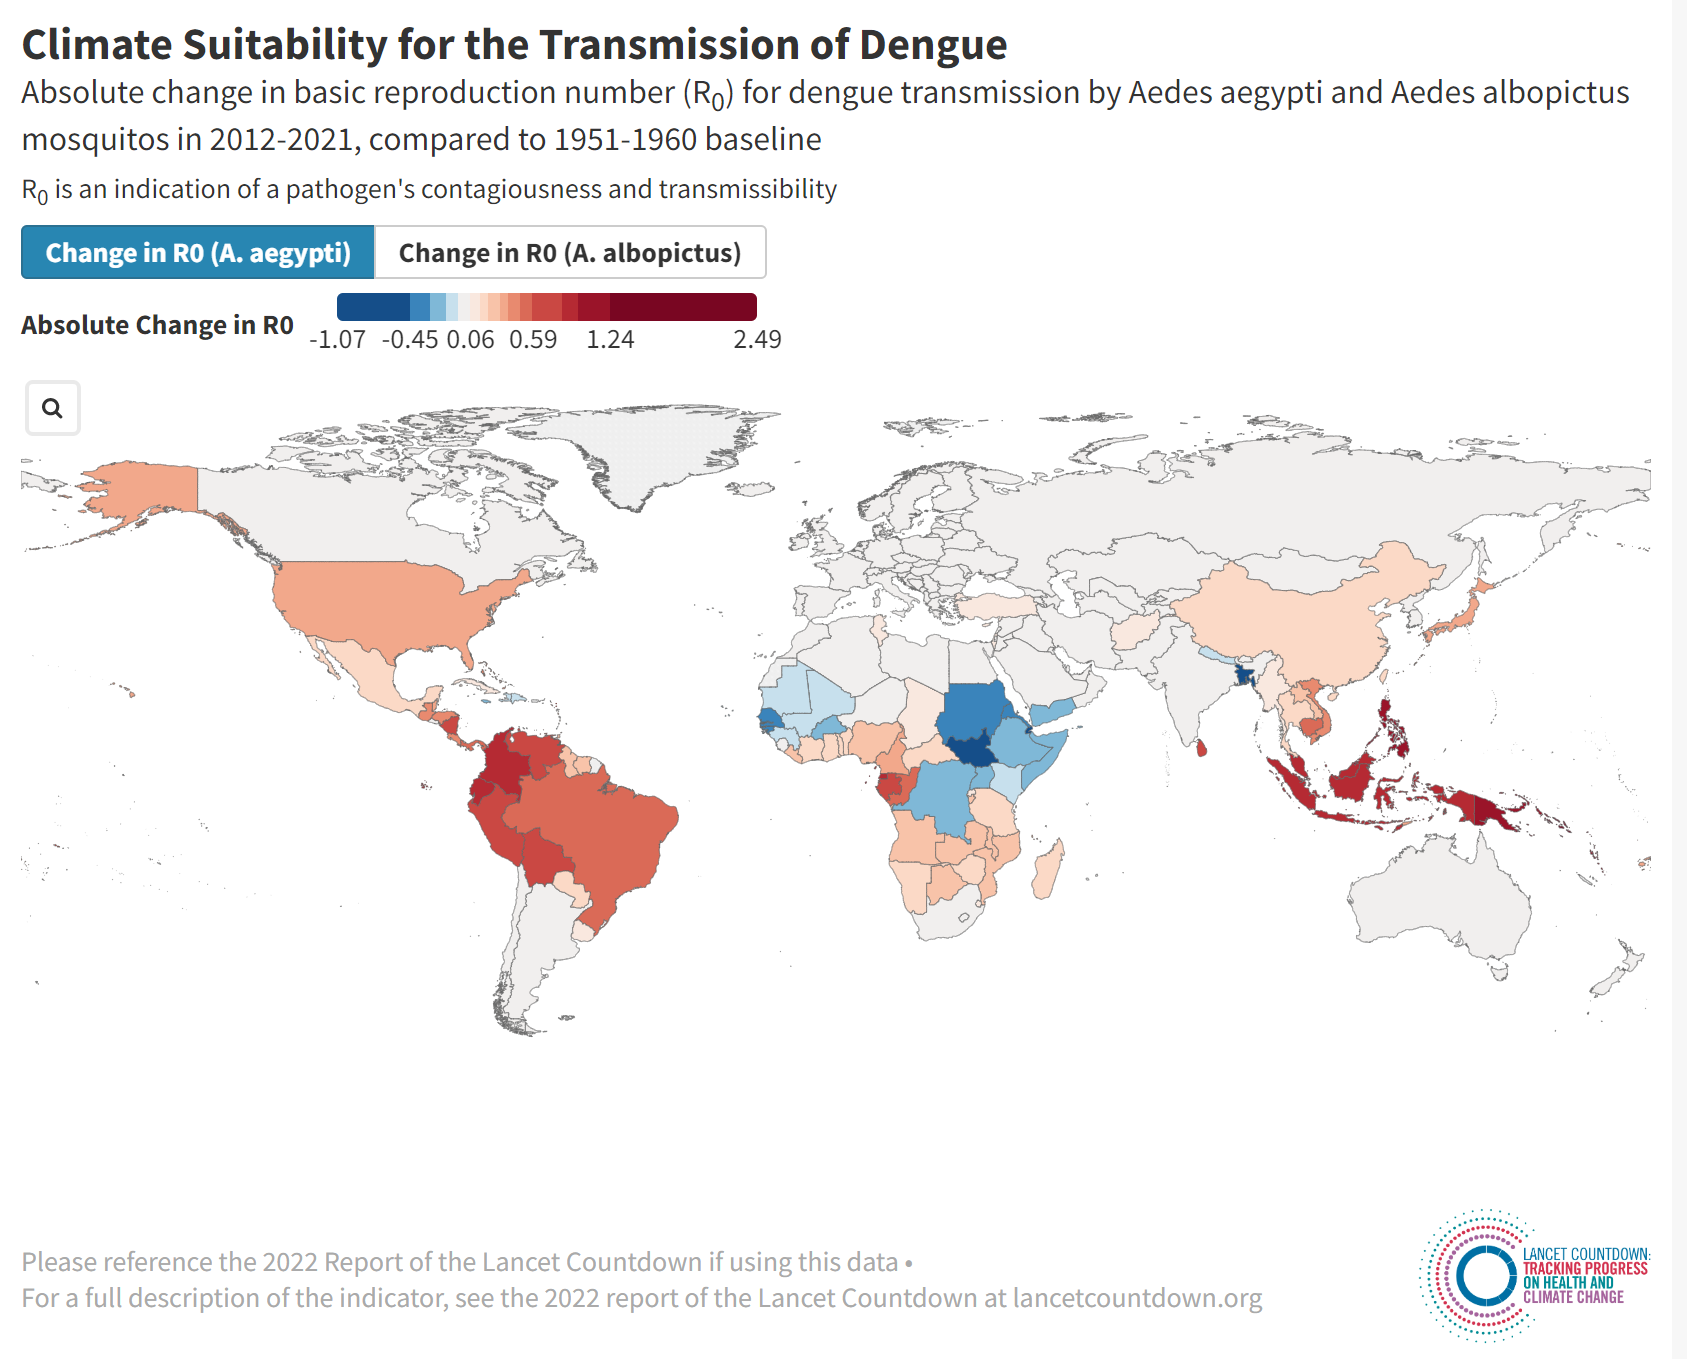 Absolute change in basic reproduction number (R0) for dengue transmission by Aedes aegypti and Aedes albopictus mosquitos in 2012-2021, compared to 1951-1960 baseline. R0 is an indication of a pathogen's contagiousness and transmissibility. The climatic suitability for the transmission of dengue increased by 11.5 percent for A. aegypti and 12.0 percent for A. albopictus from 1951-1960 to 2012-2021; the length of the transmission season for malaria increased by 31.3% and 13.8% in the highlands of the Americas and Africa, respectively, from 1951-1960 to 2012-2021. Graphic: The Lancet